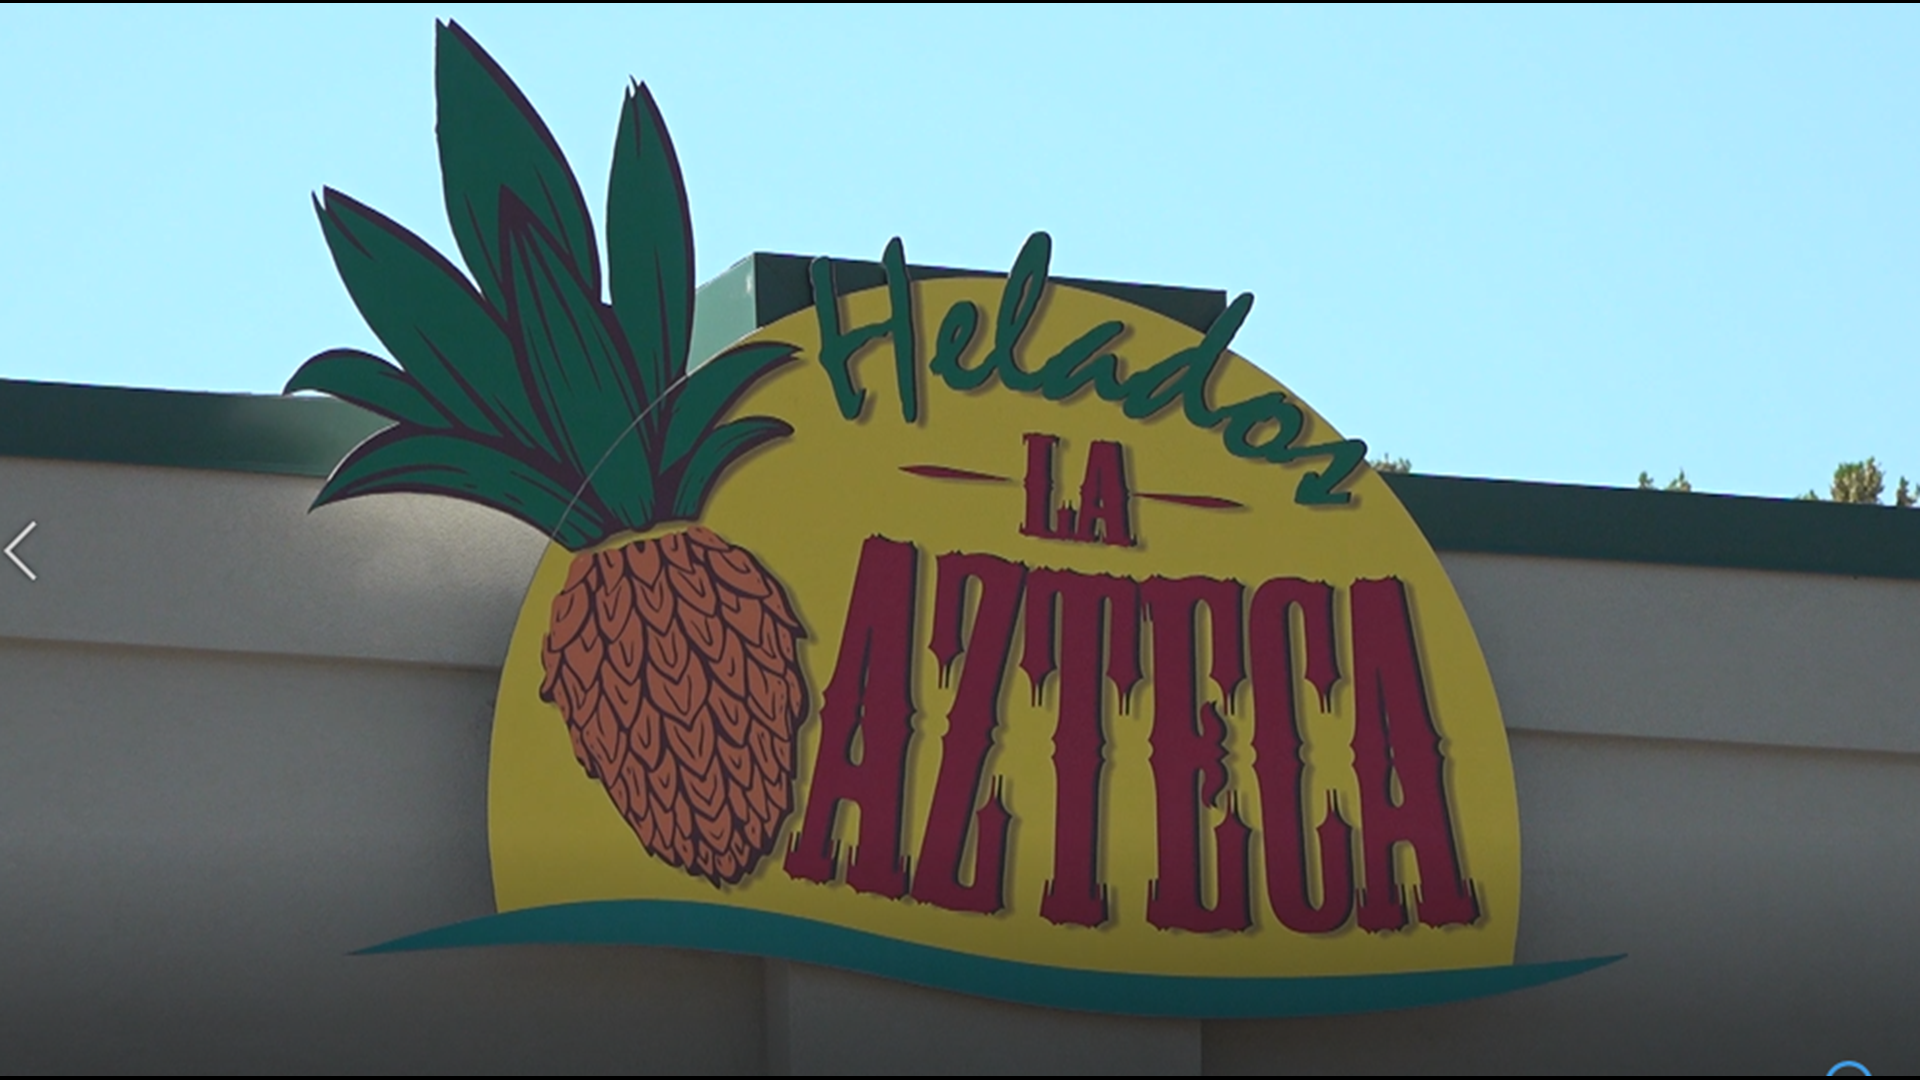 A new Mexican ice cream shop is set to scoop some economic growth into the community.